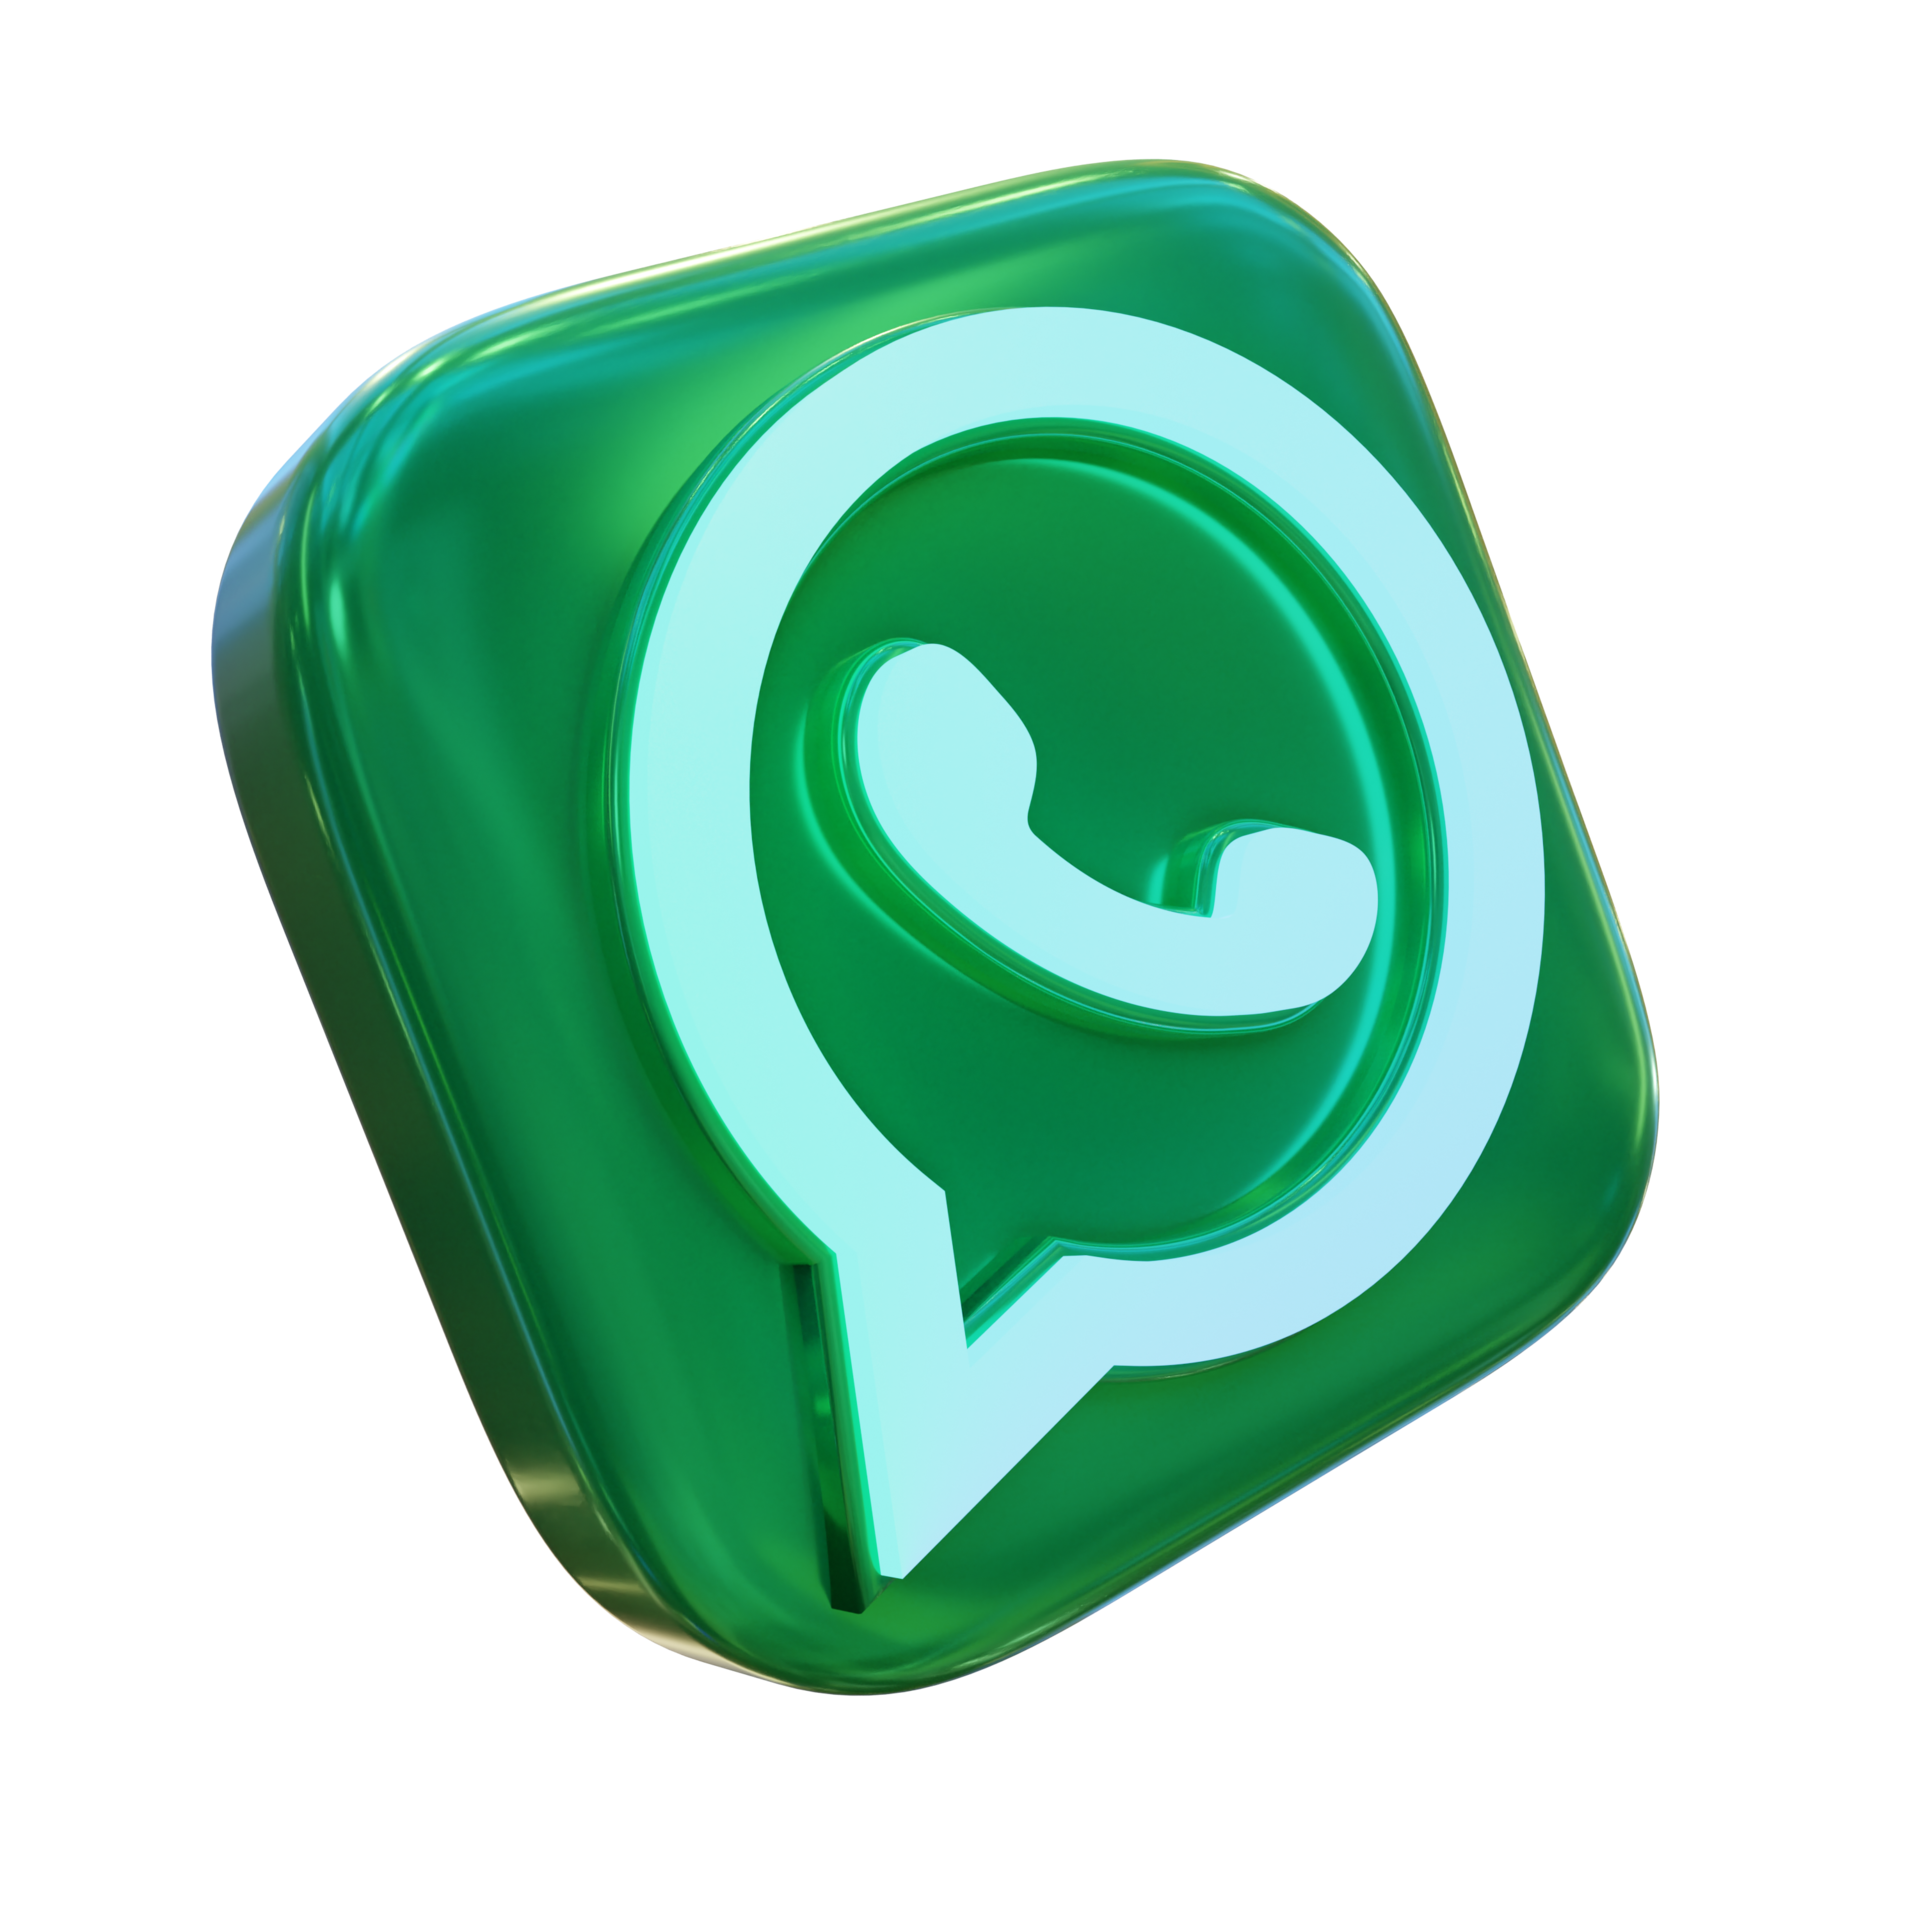 WhatsApp Logo Beside Earth 3D Rendering. Top Apps Concept Stock Photo,  Picture and Royalty Free Image. Image 149962937.